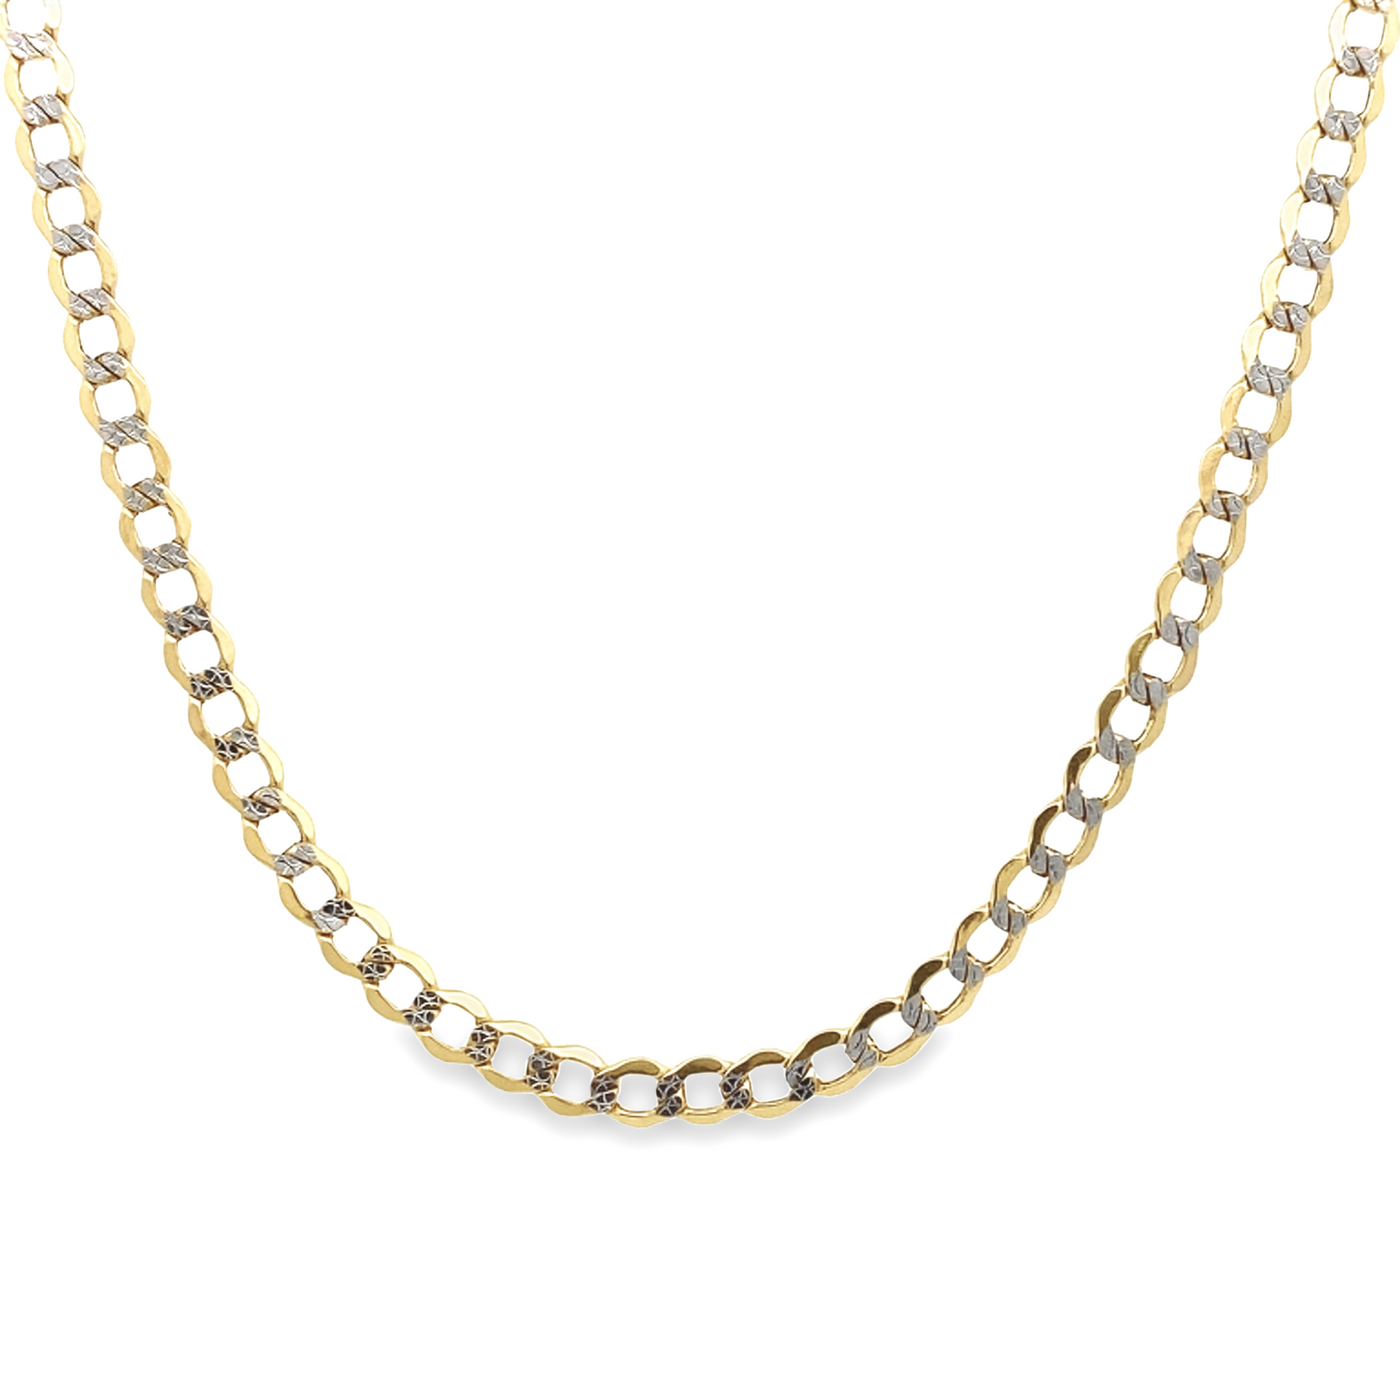 10 Karat Yellow and White Gold 3.5mm Curb Link Chain